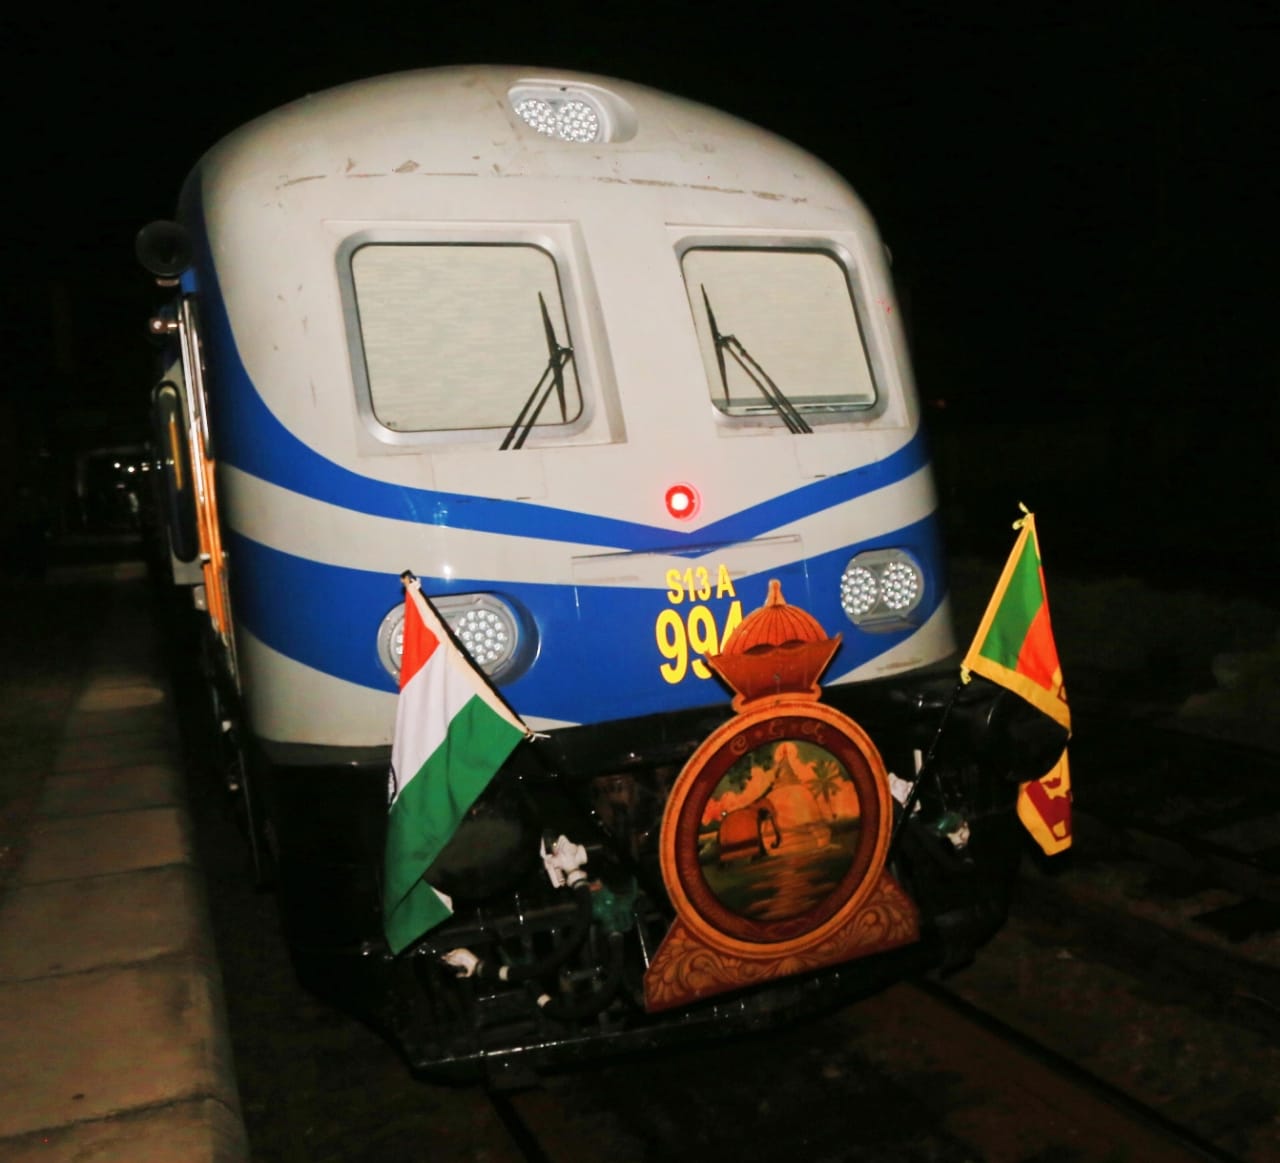 Continued assistance by India towards developing railway infrastructure in Sri Lanka : Mount Lavinia – KKS train inaugurated